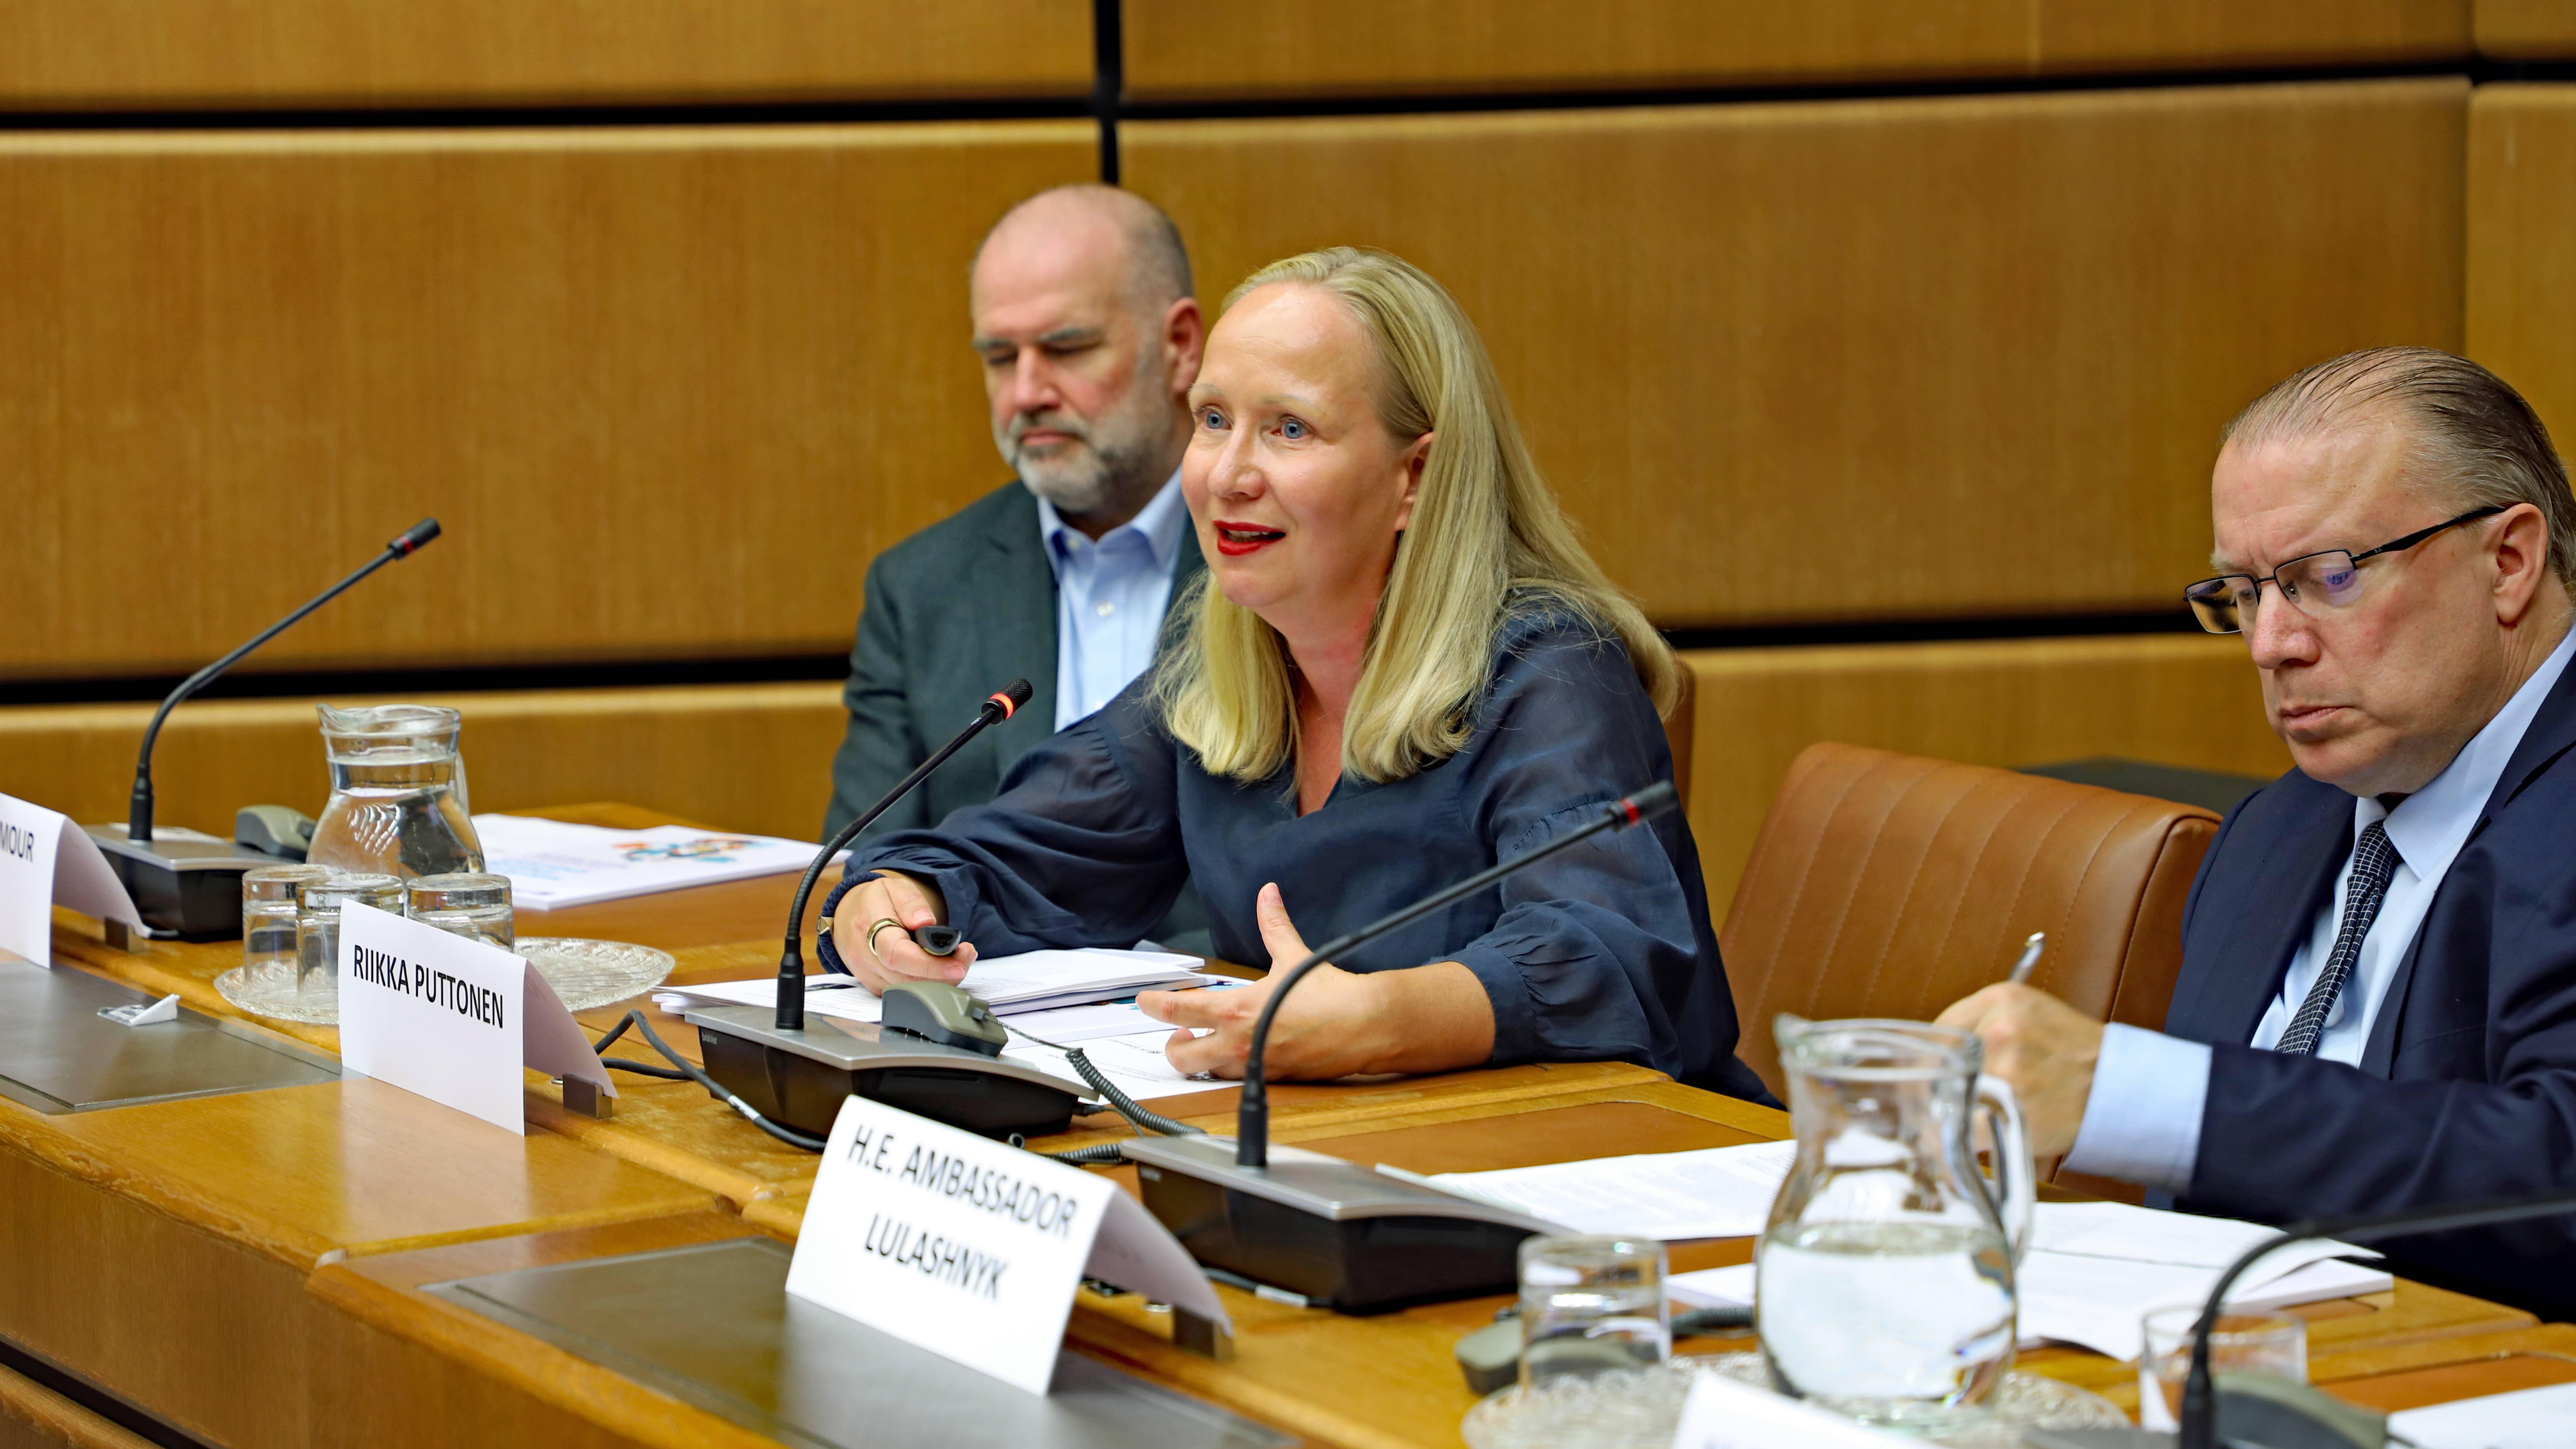 A panel with two men and a woman. Their name plates are visible on the table. One of the panellists, a woman, is speaking through a microphone.